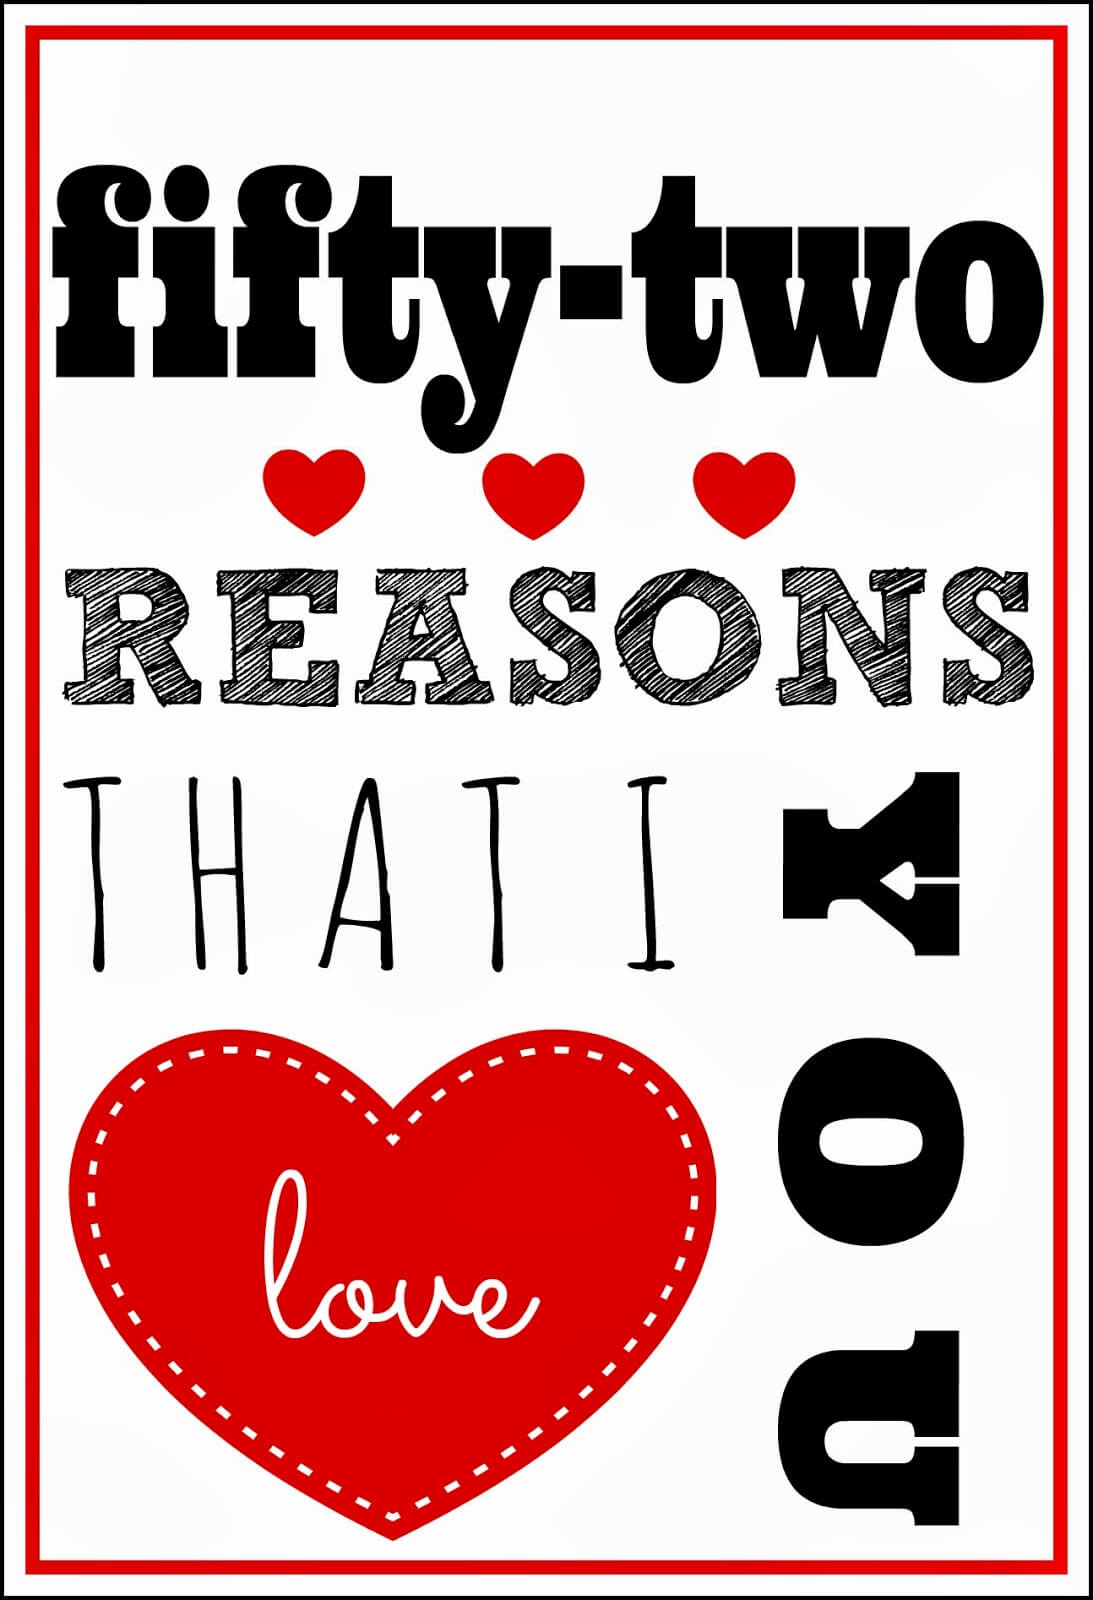 52 Reasons I Love You Template Free ] – 1000 Ideas About 52 Pertaining To 52 Reasons Why I Love You Cards Templates Free